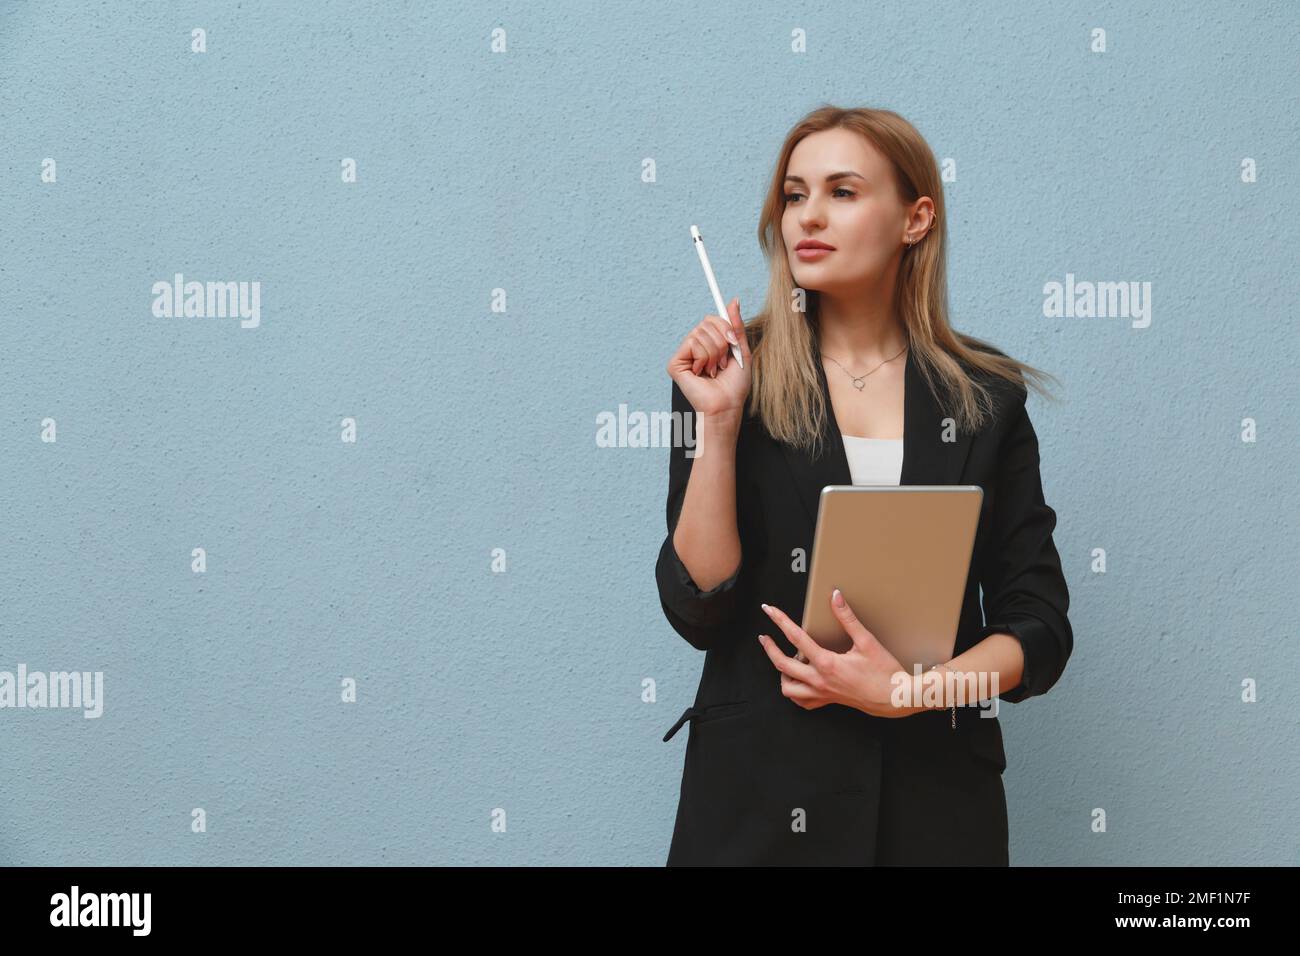 Blonde young business woman wearing black suit over blue plain background, carrying laptop Stock Photo